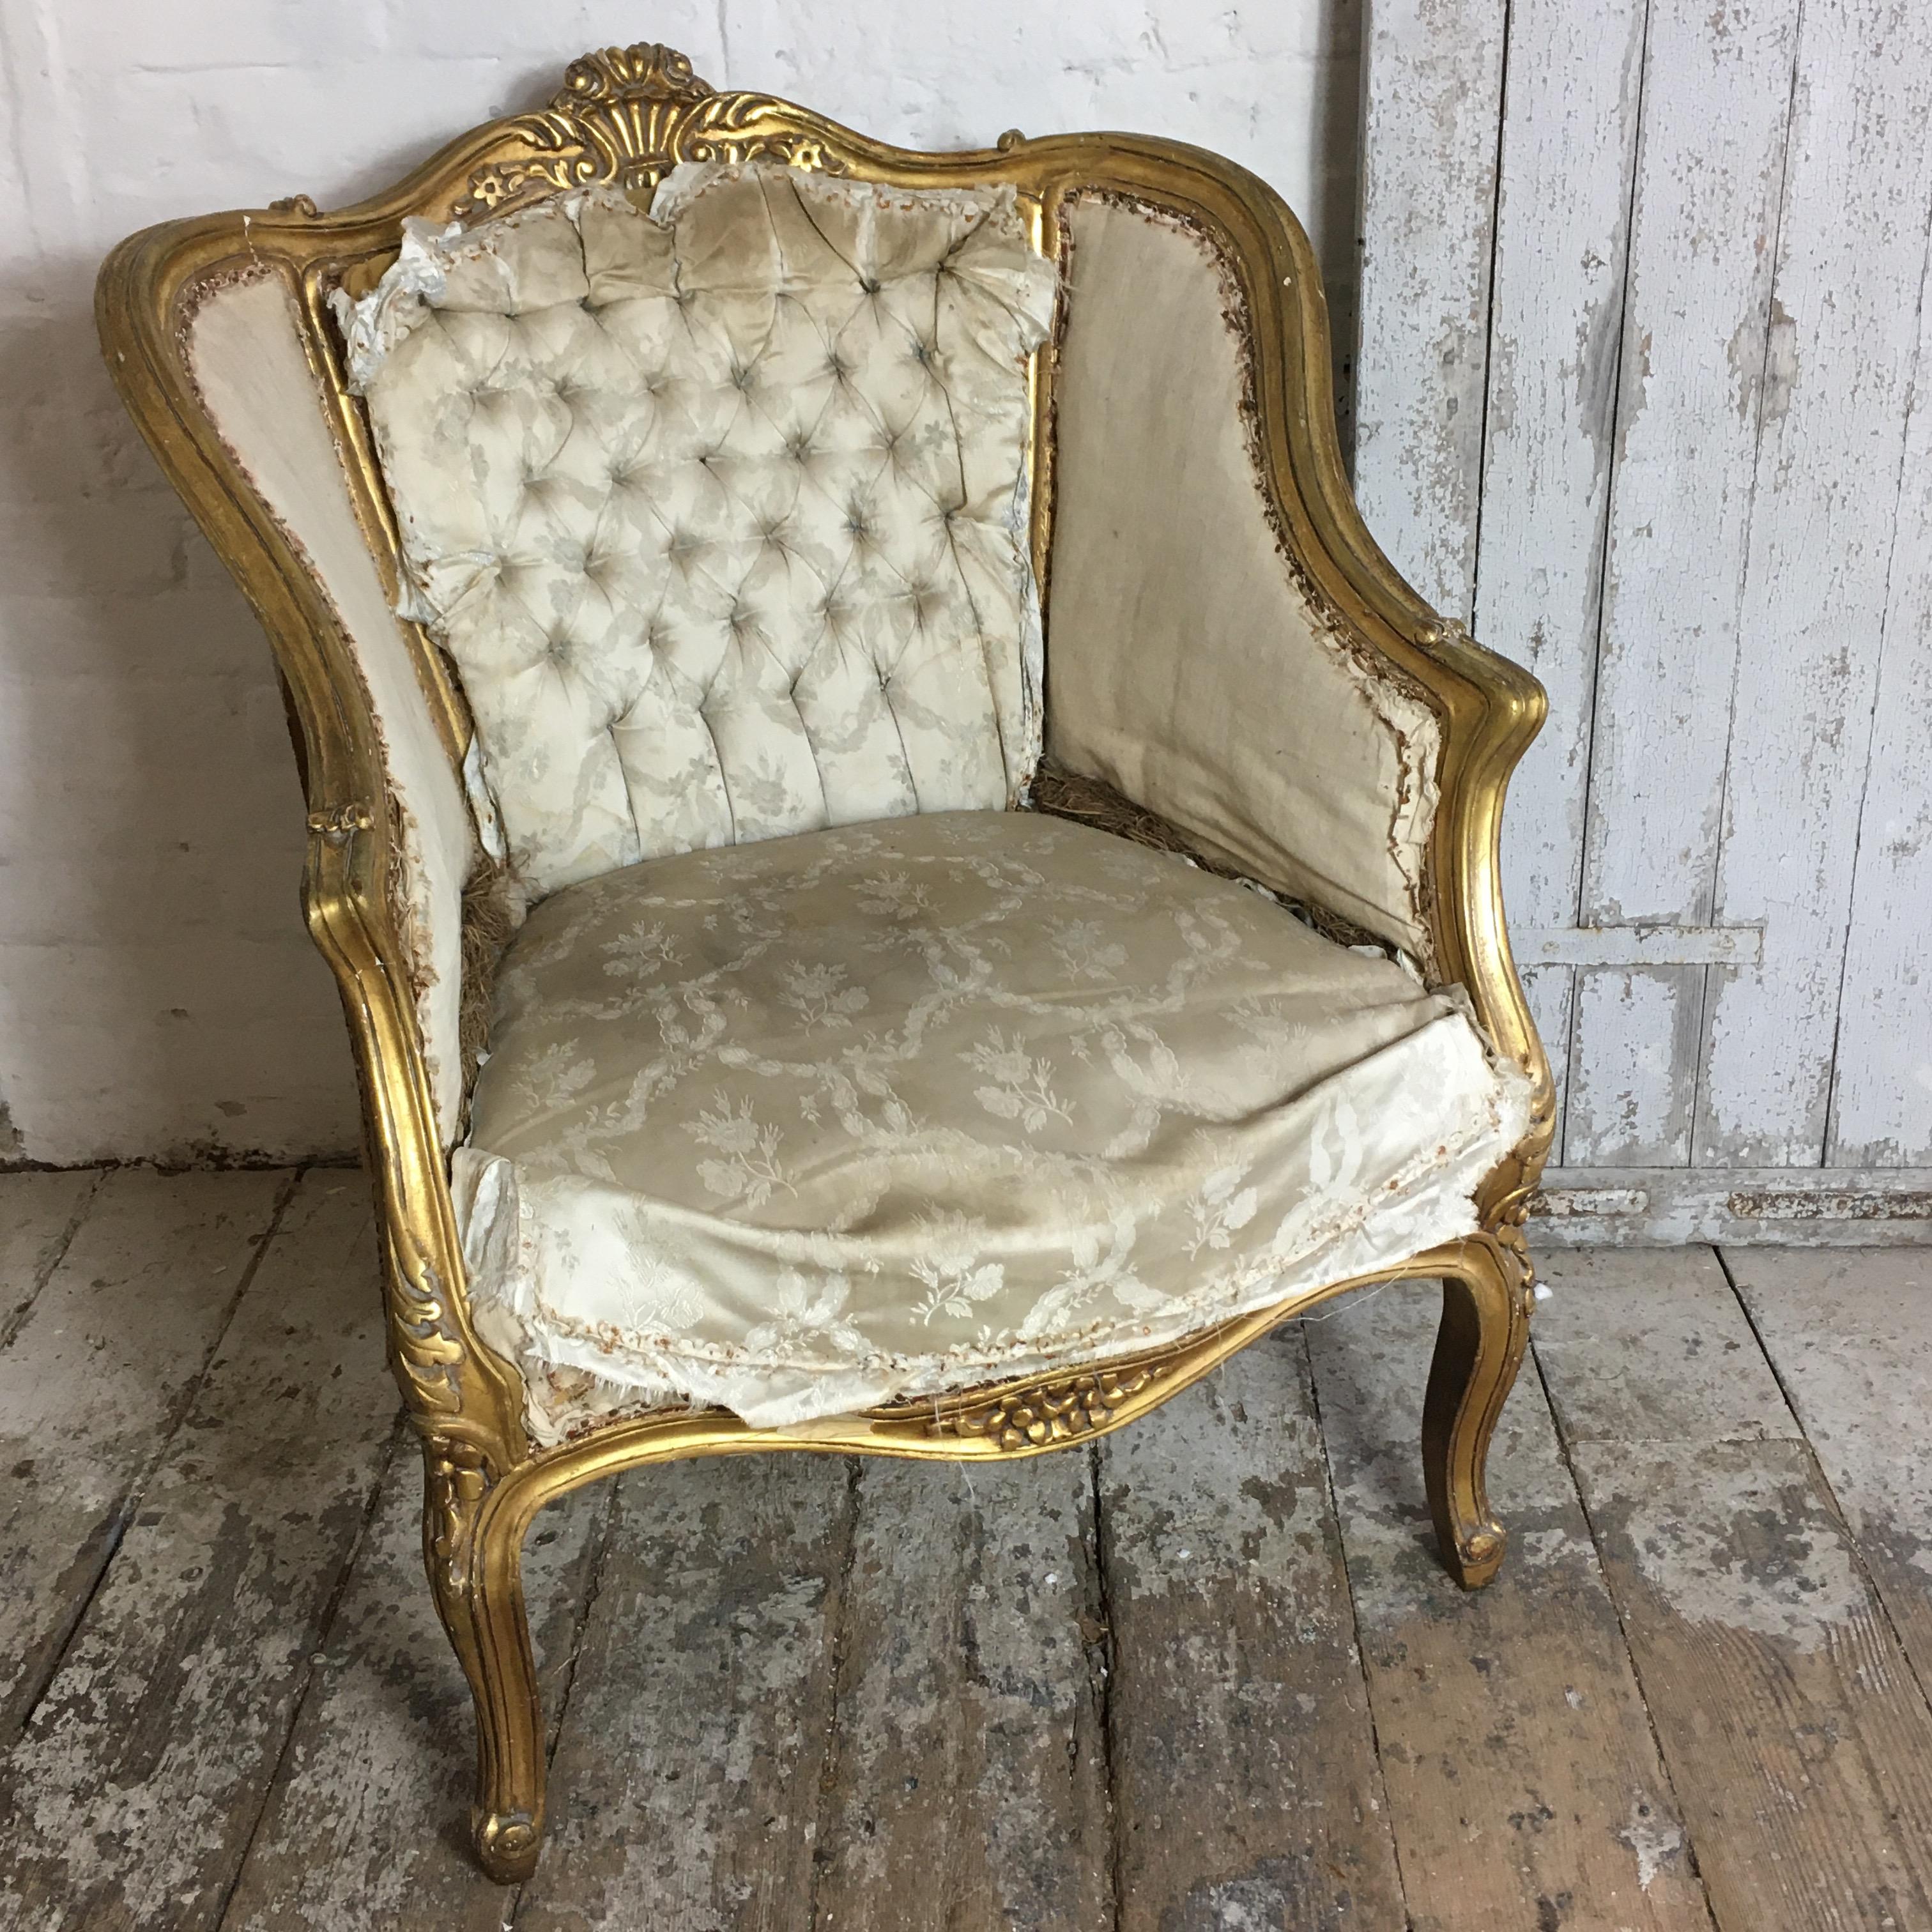 French Louis XV style giltwood armchair, circa 1900.
Gilt wood frame.
Button back.
Part stripped ready for new upholstery.
Beautiful wide shaped wing back armchair.
Delicate detailing to the legs and crested back.
Structurally very good.
The